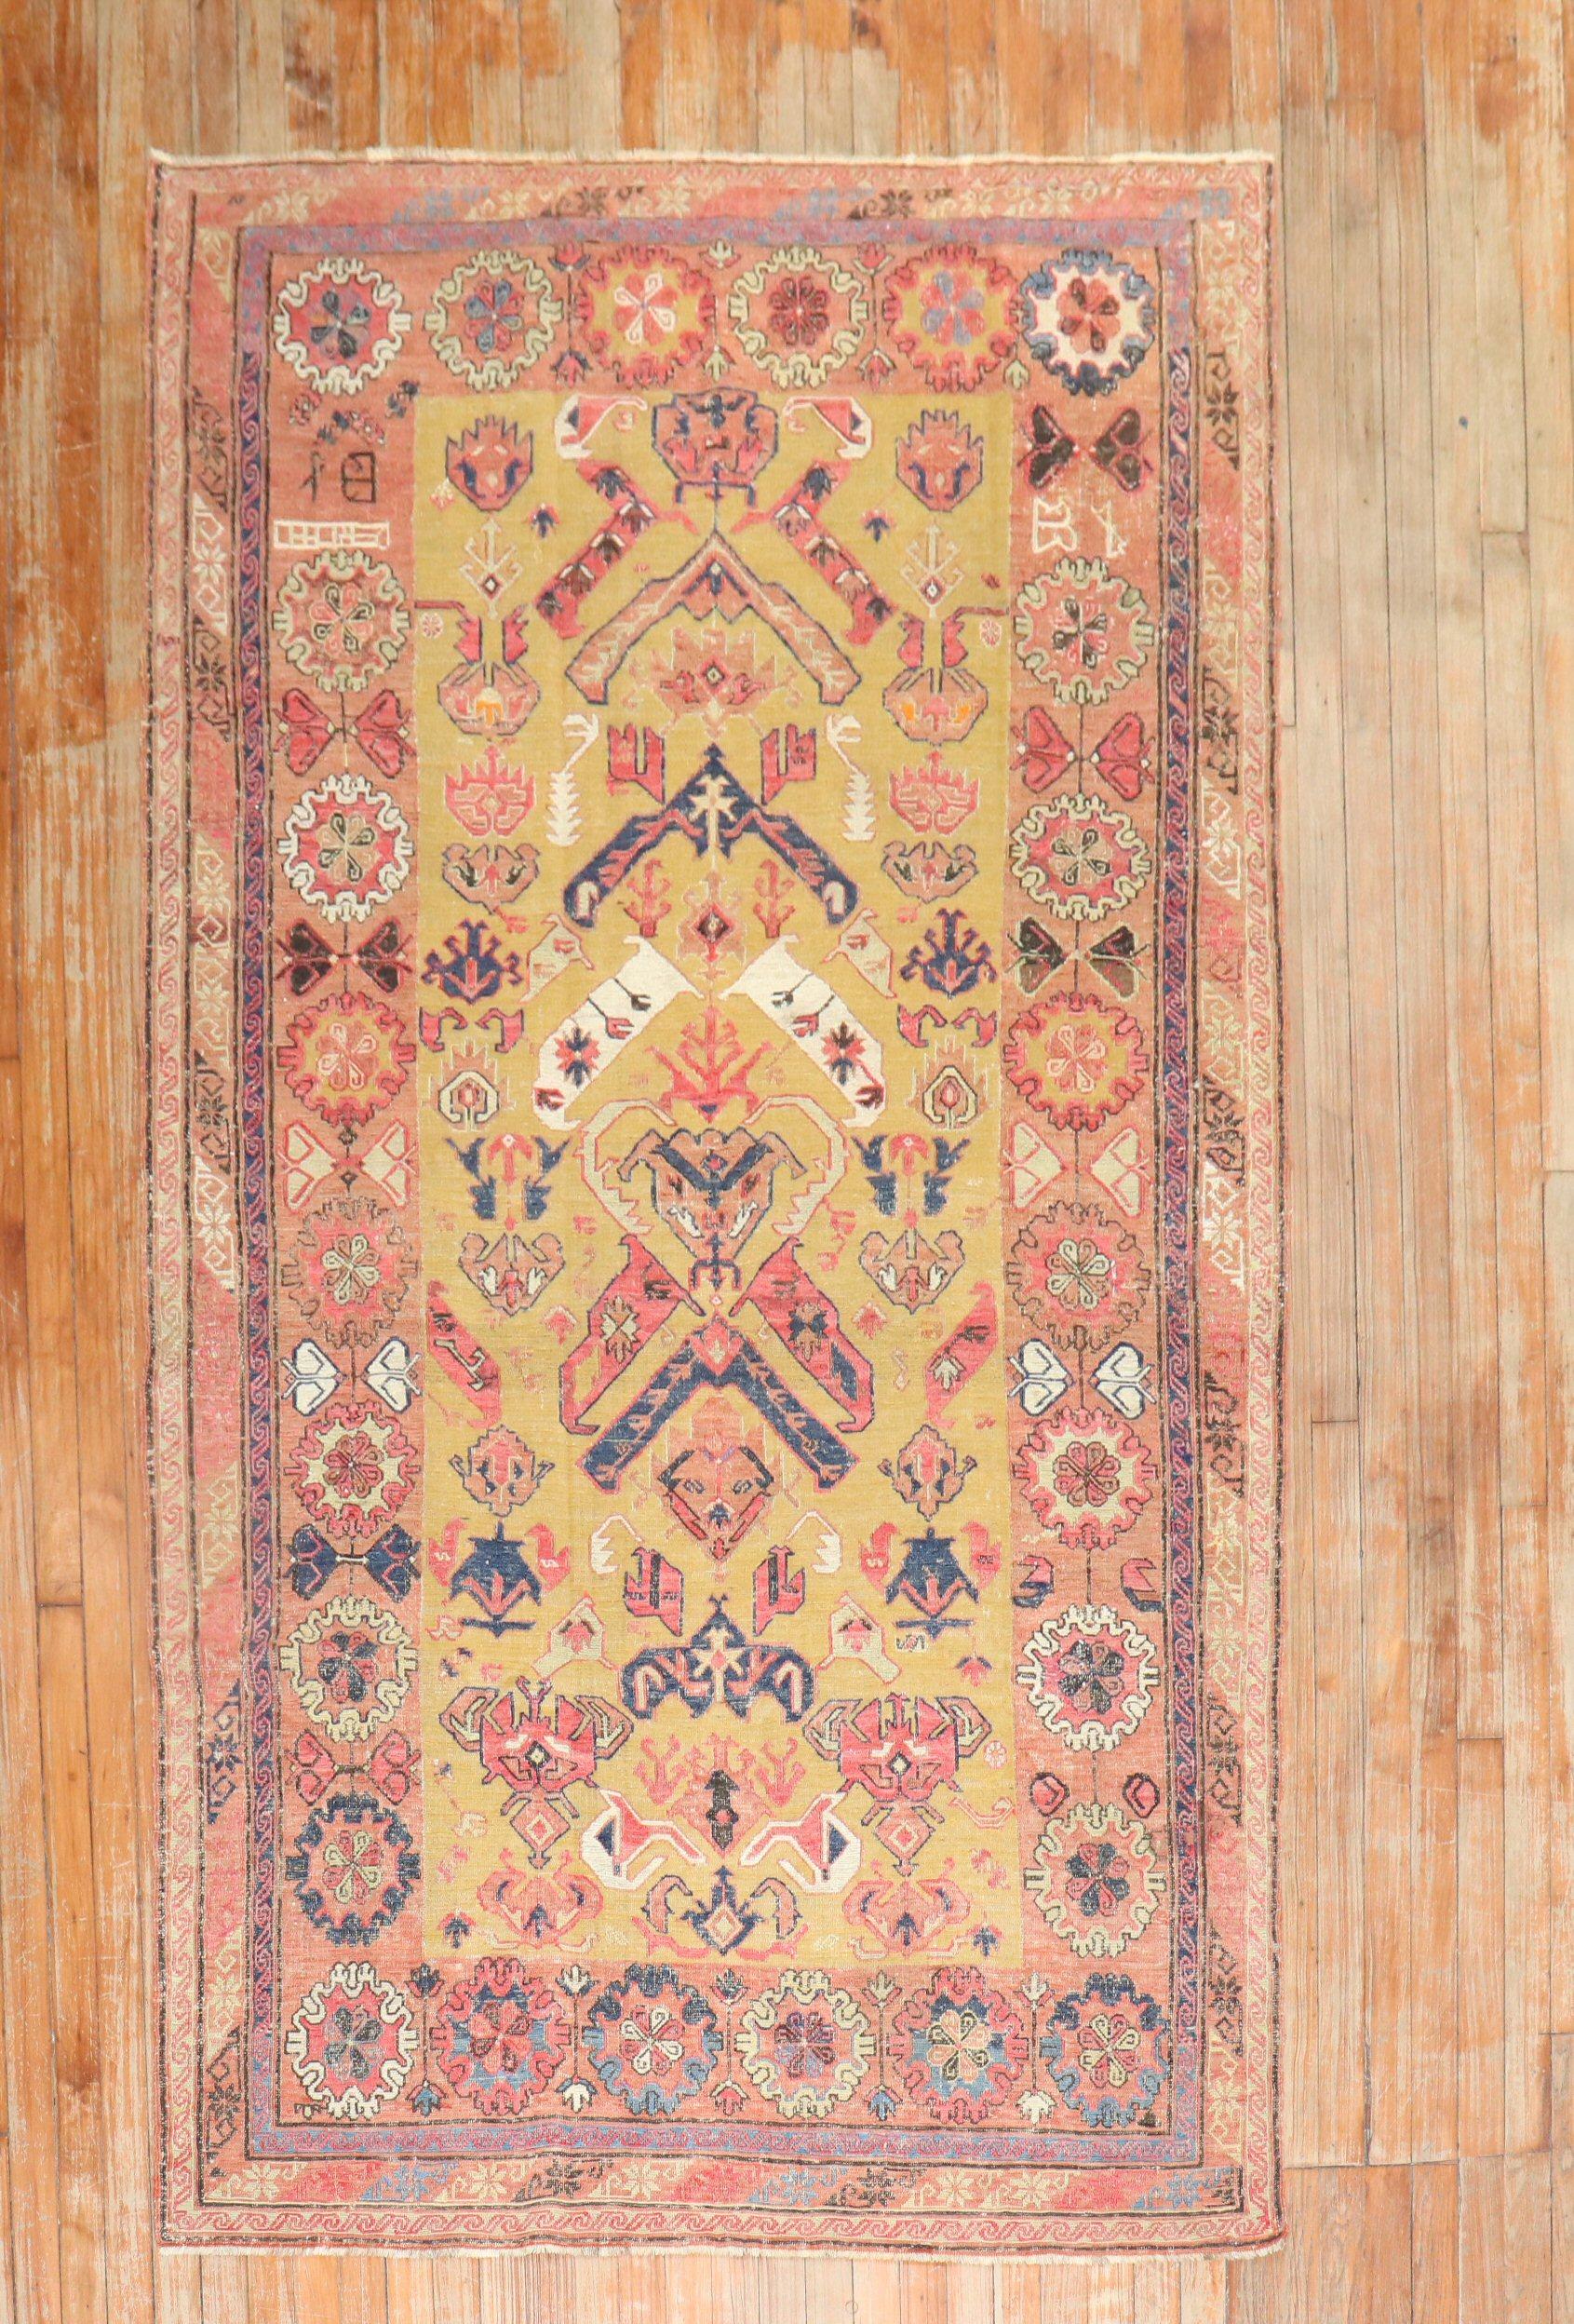 Late-19th century Persian flat-weave Soumak rug with a tribal all-over geometric design in rustic colors on an usual gold field

Measures: 7' x 10'.